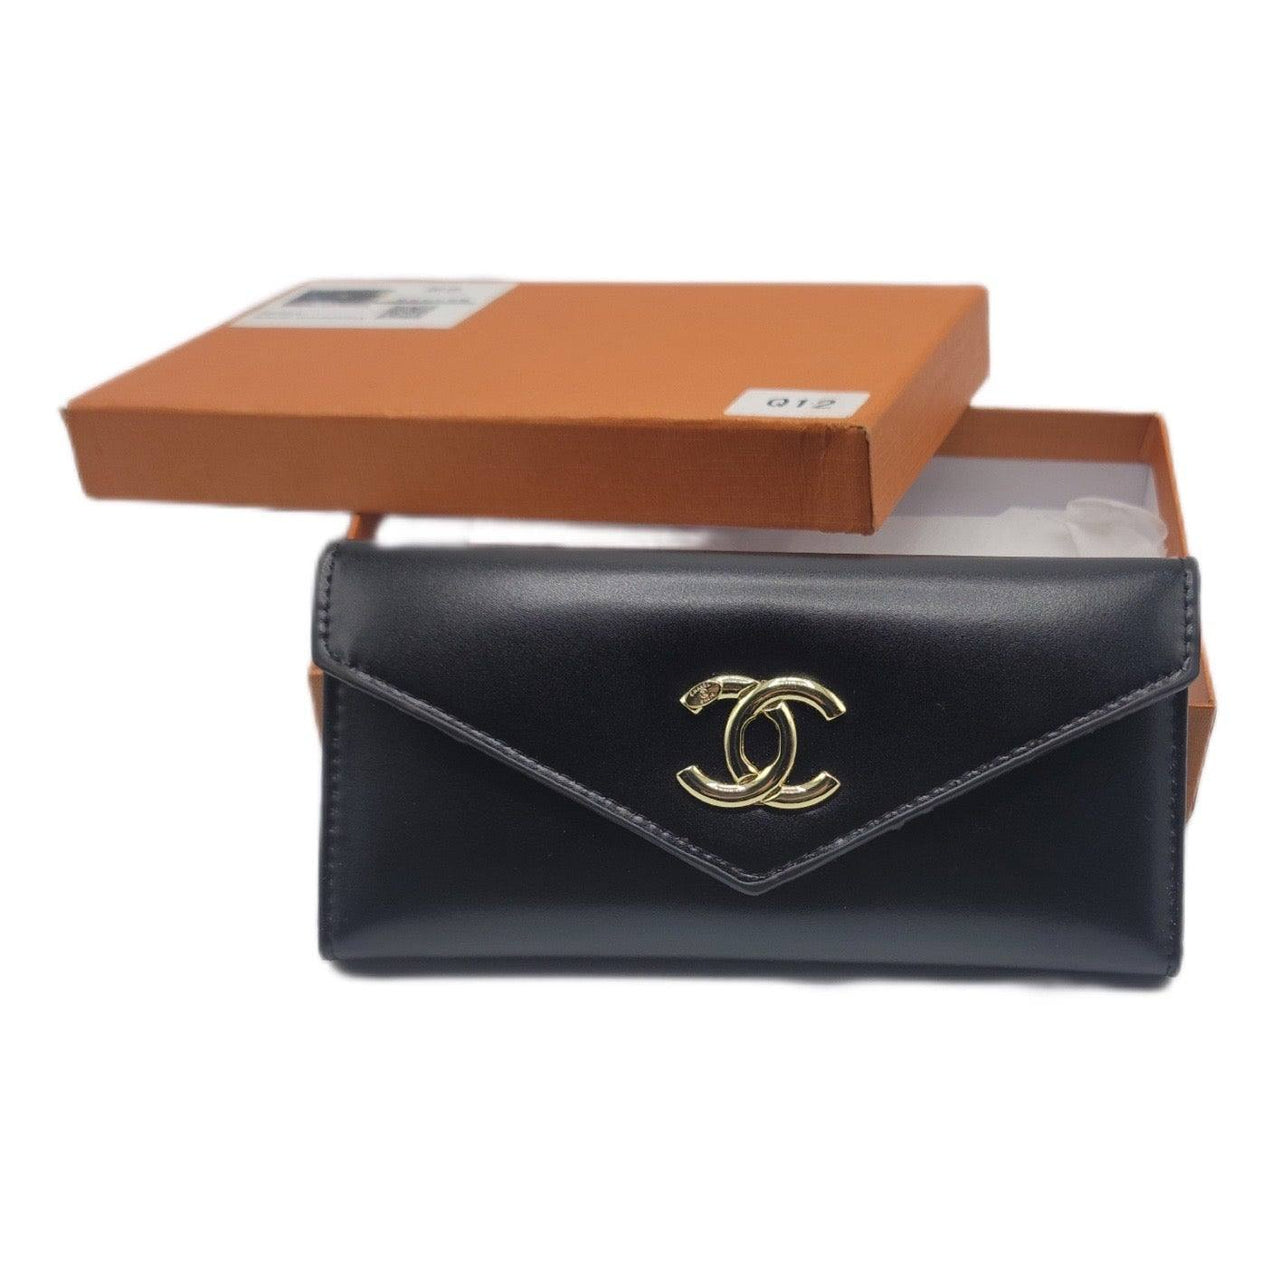 The Bag Couture Luggage & Bags Chanel 3 Fold Wallet Black